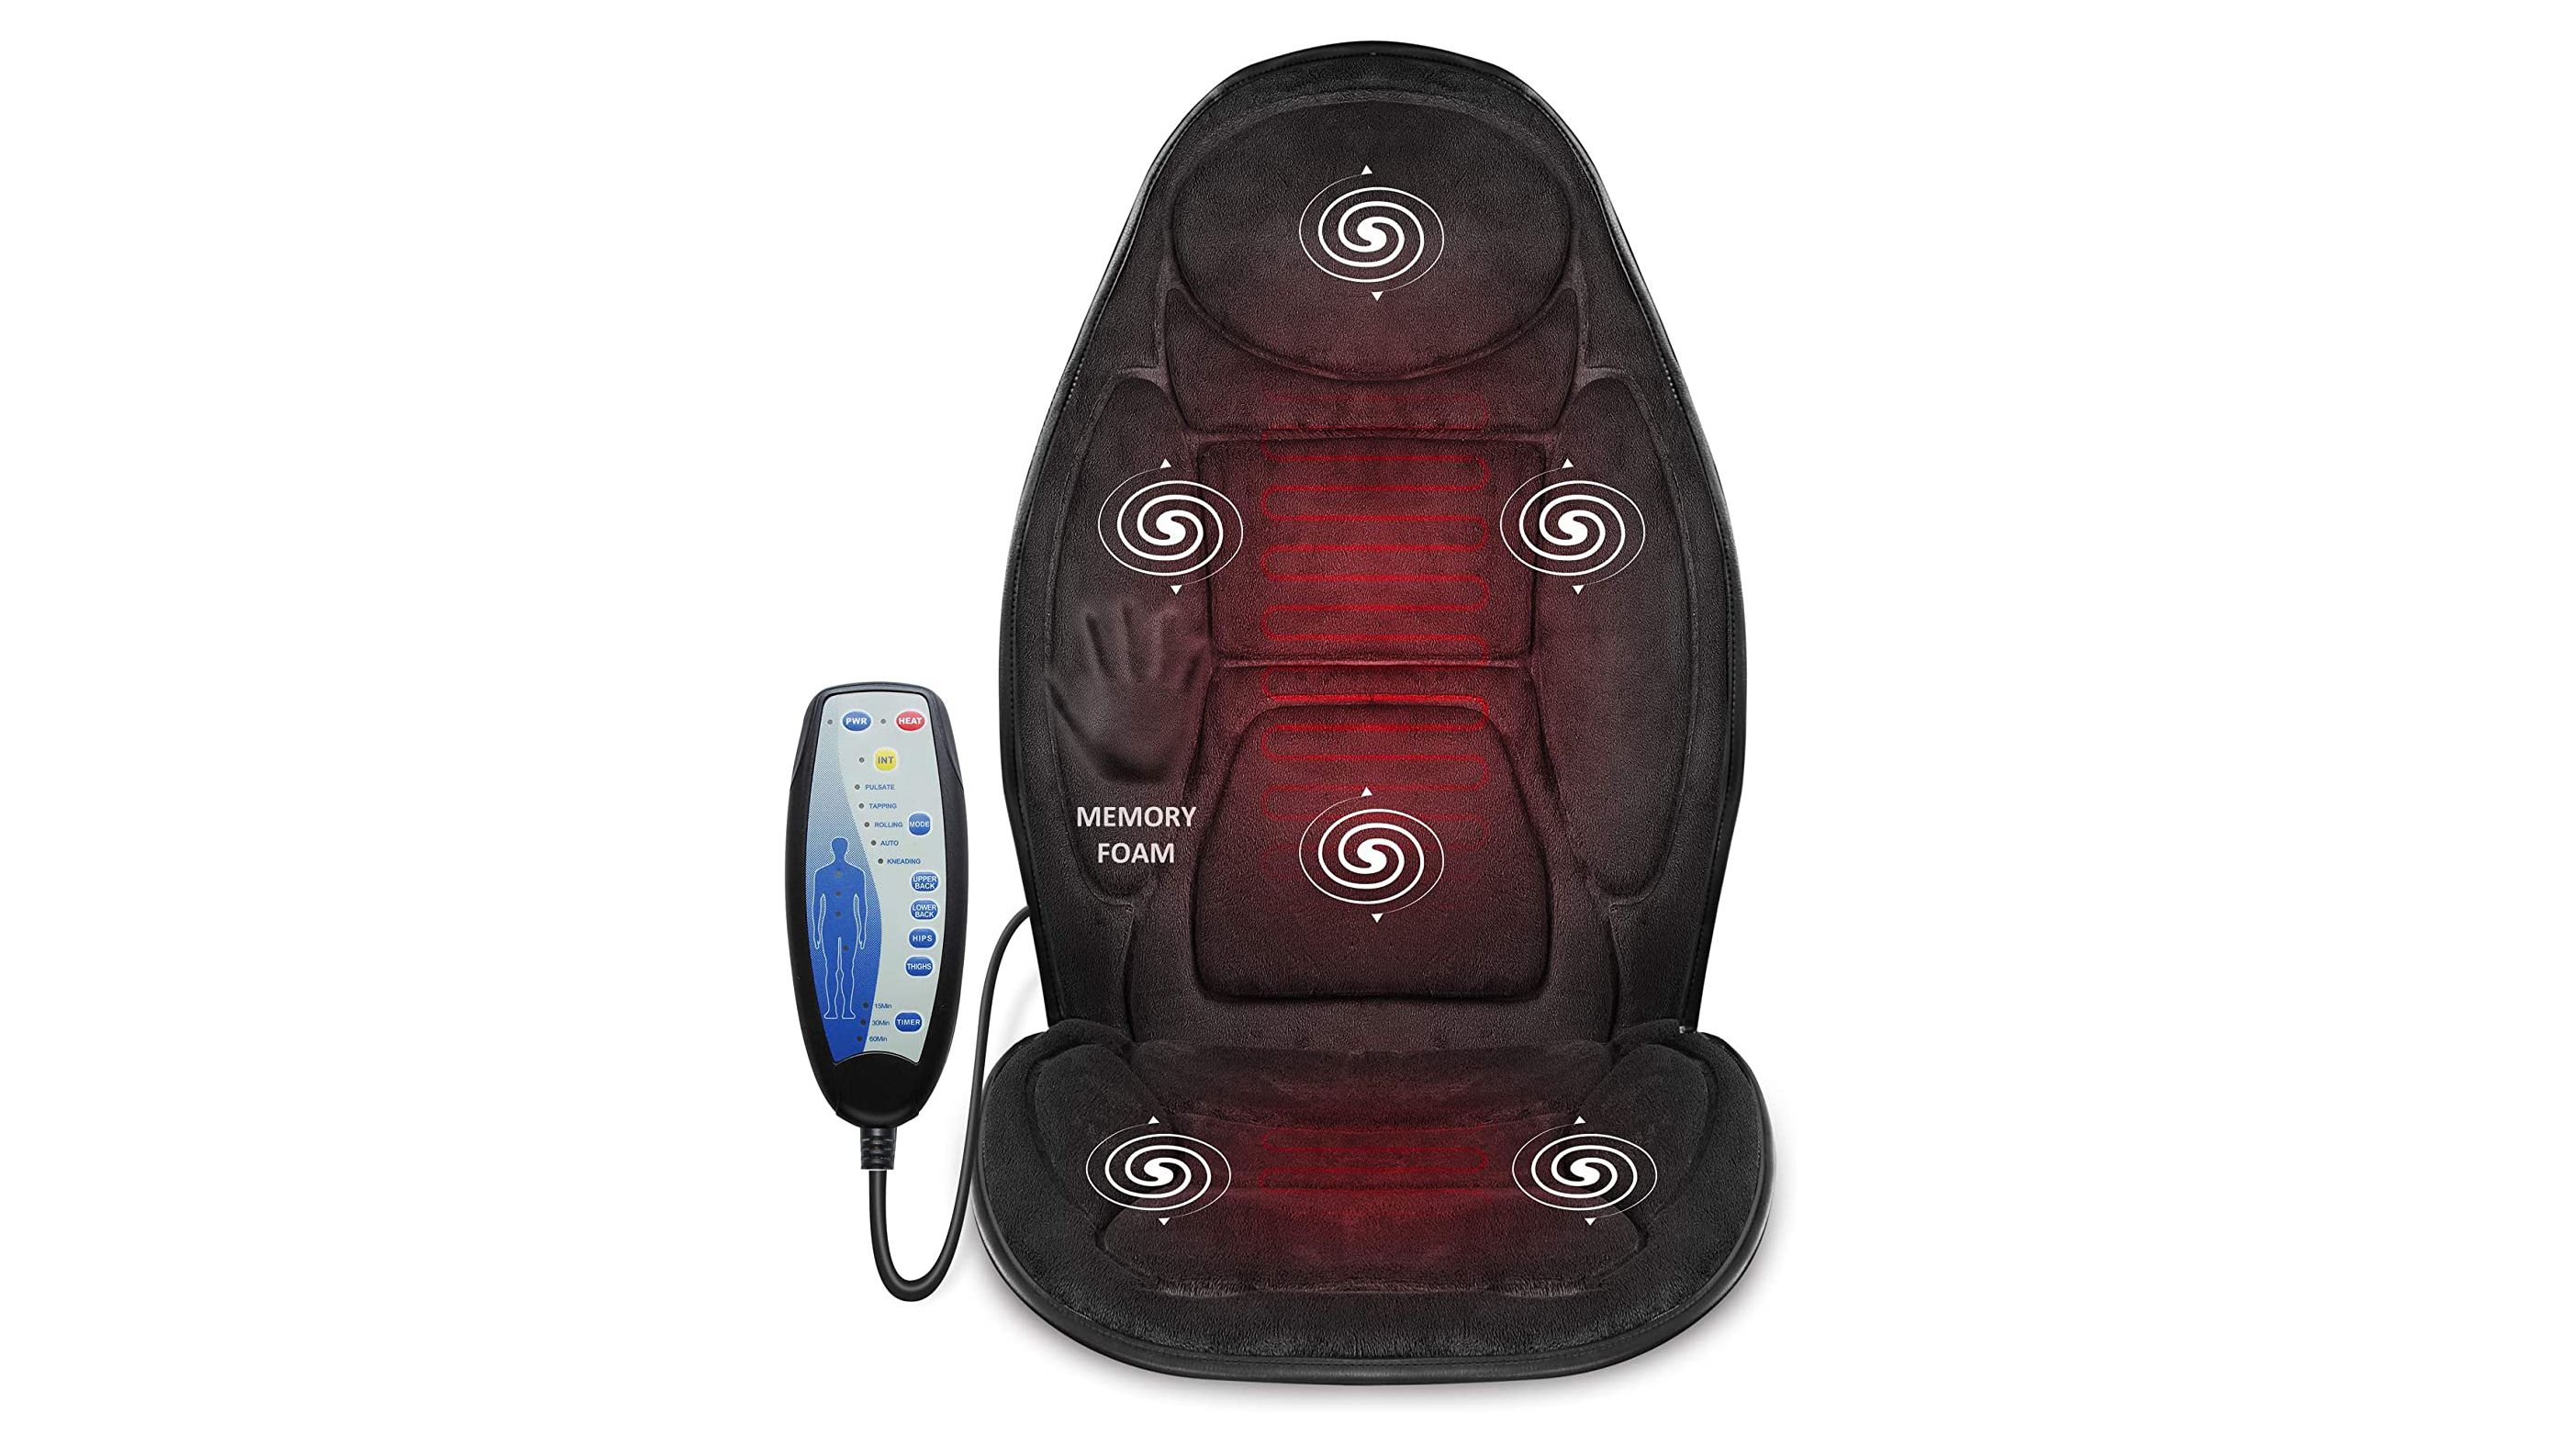 Seat Cushion To Help With Lower Back Pain During Holiday Travel